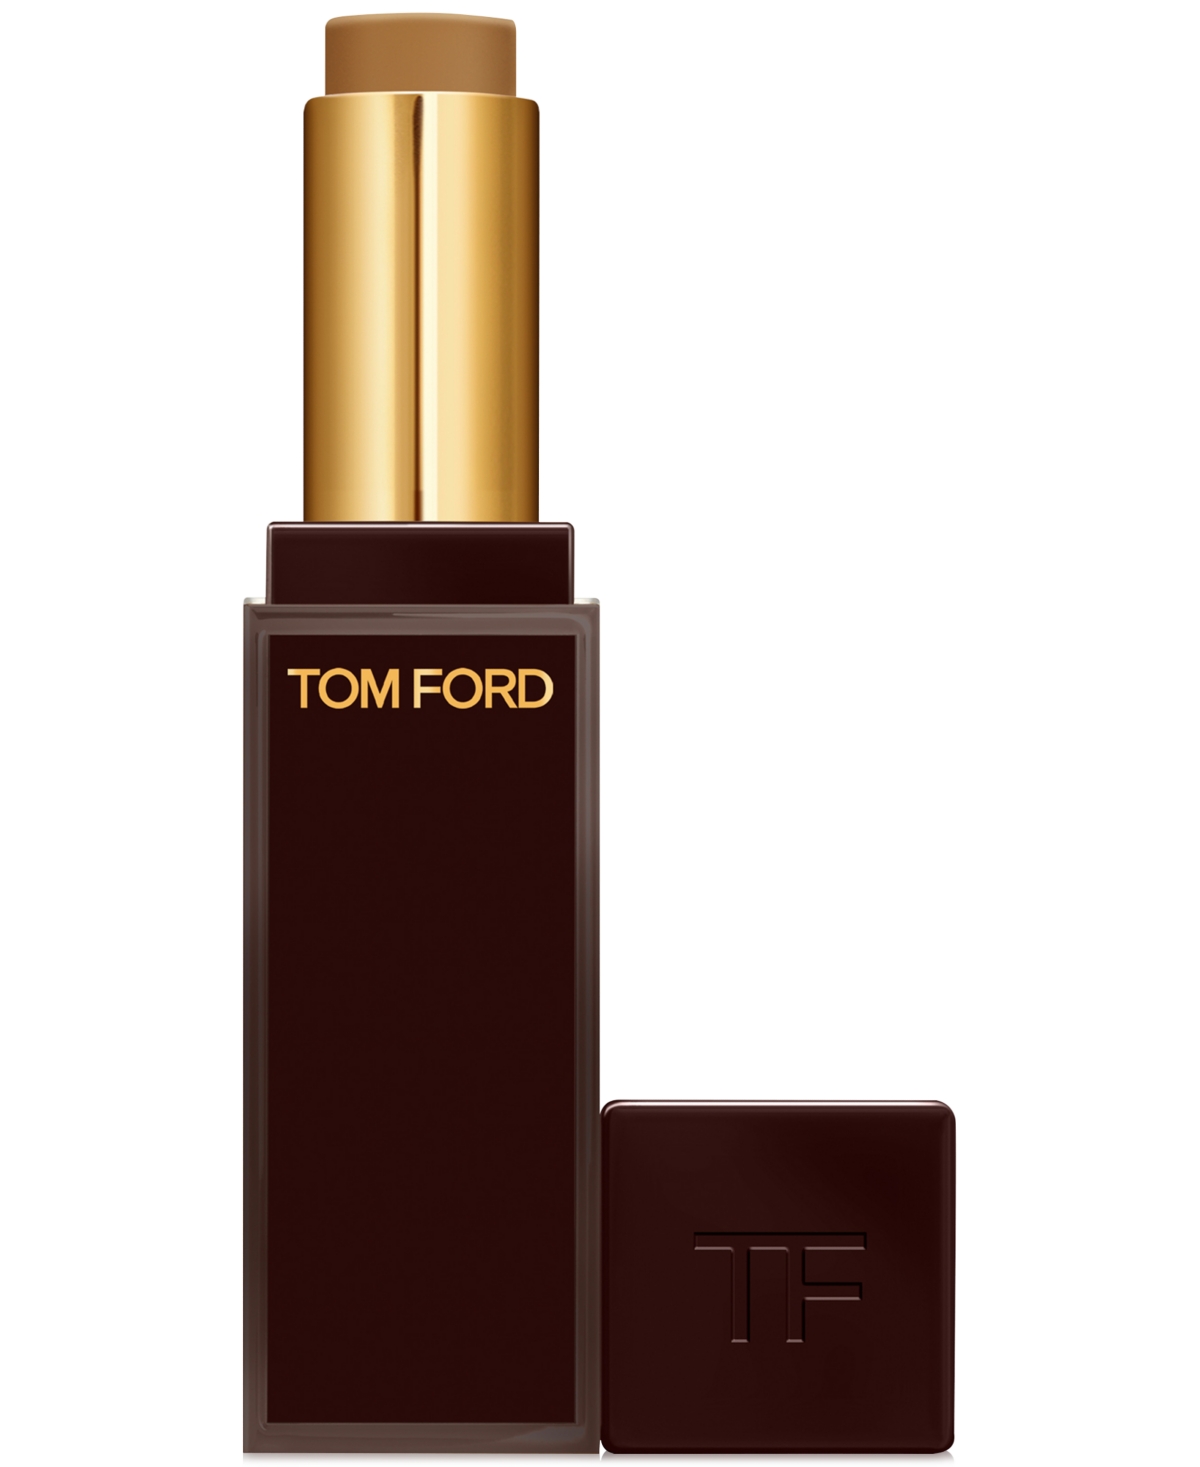 Tom Ford Traceless Soft Matte Concealer In W Cocoa (deep Skin With Golden Undertone